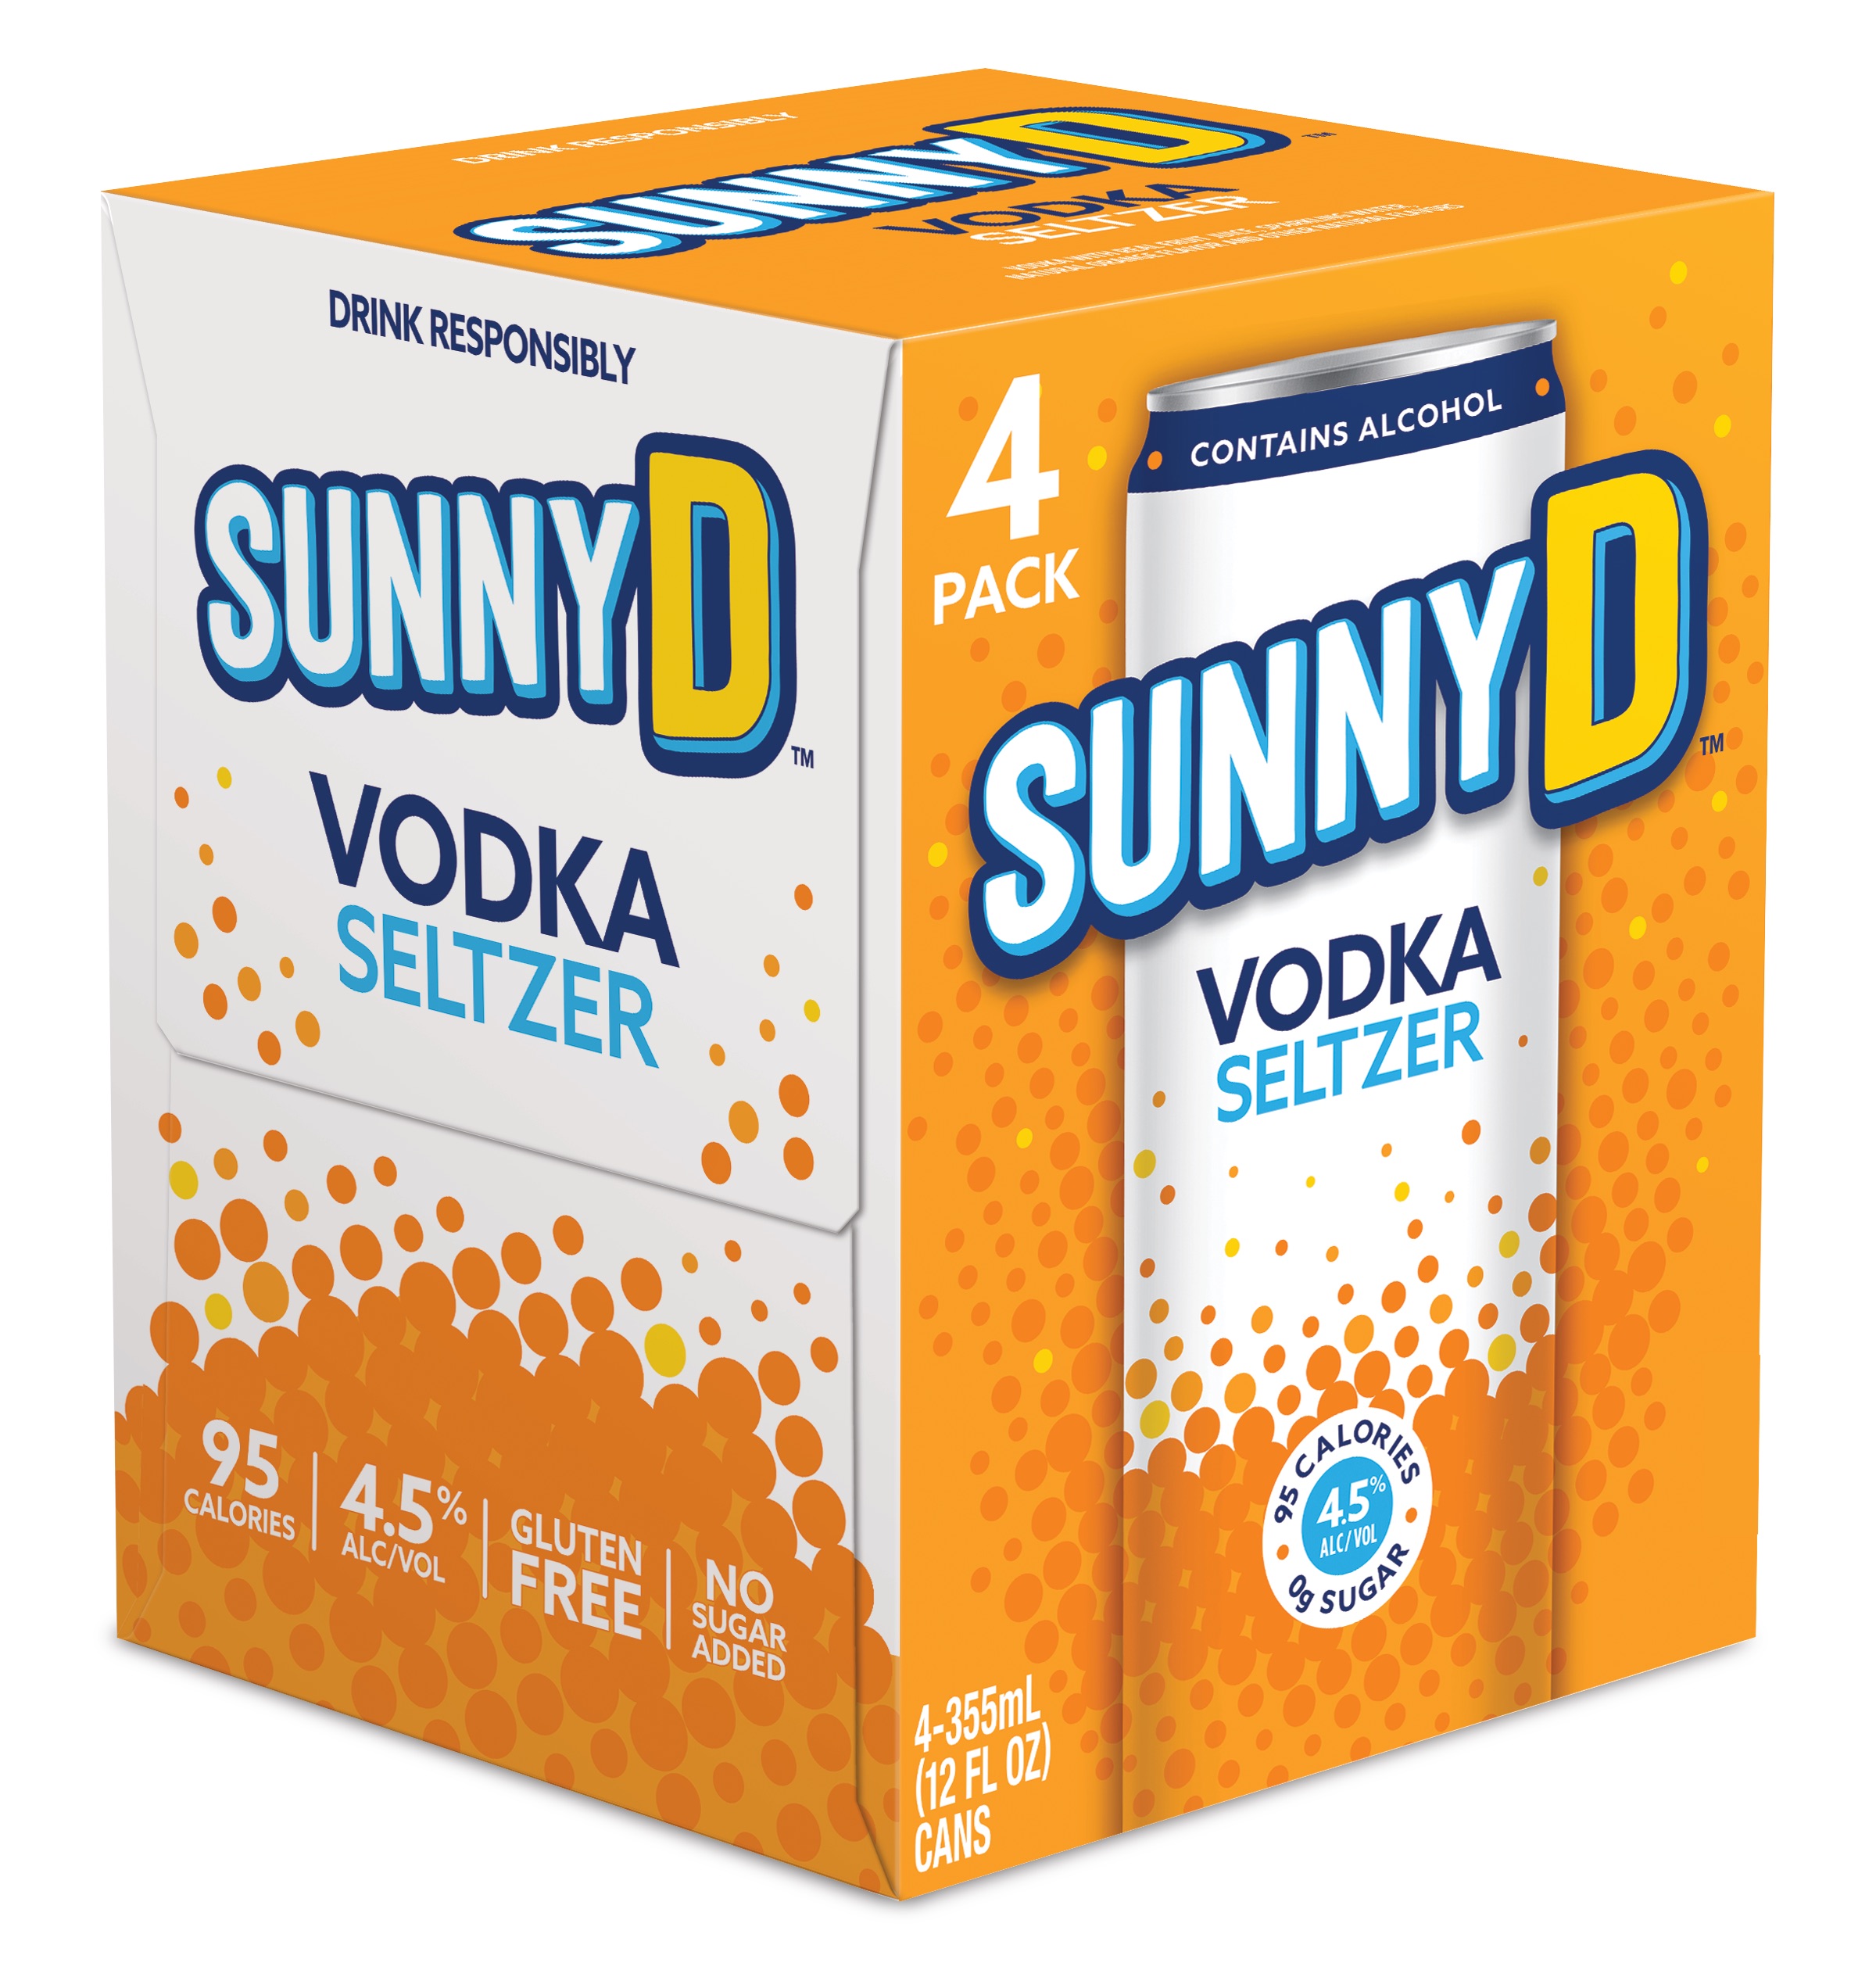 PHOTO: New SunnyD Vodka Seltzer comes in 12-ounce slim cans in a four-pack or individually.